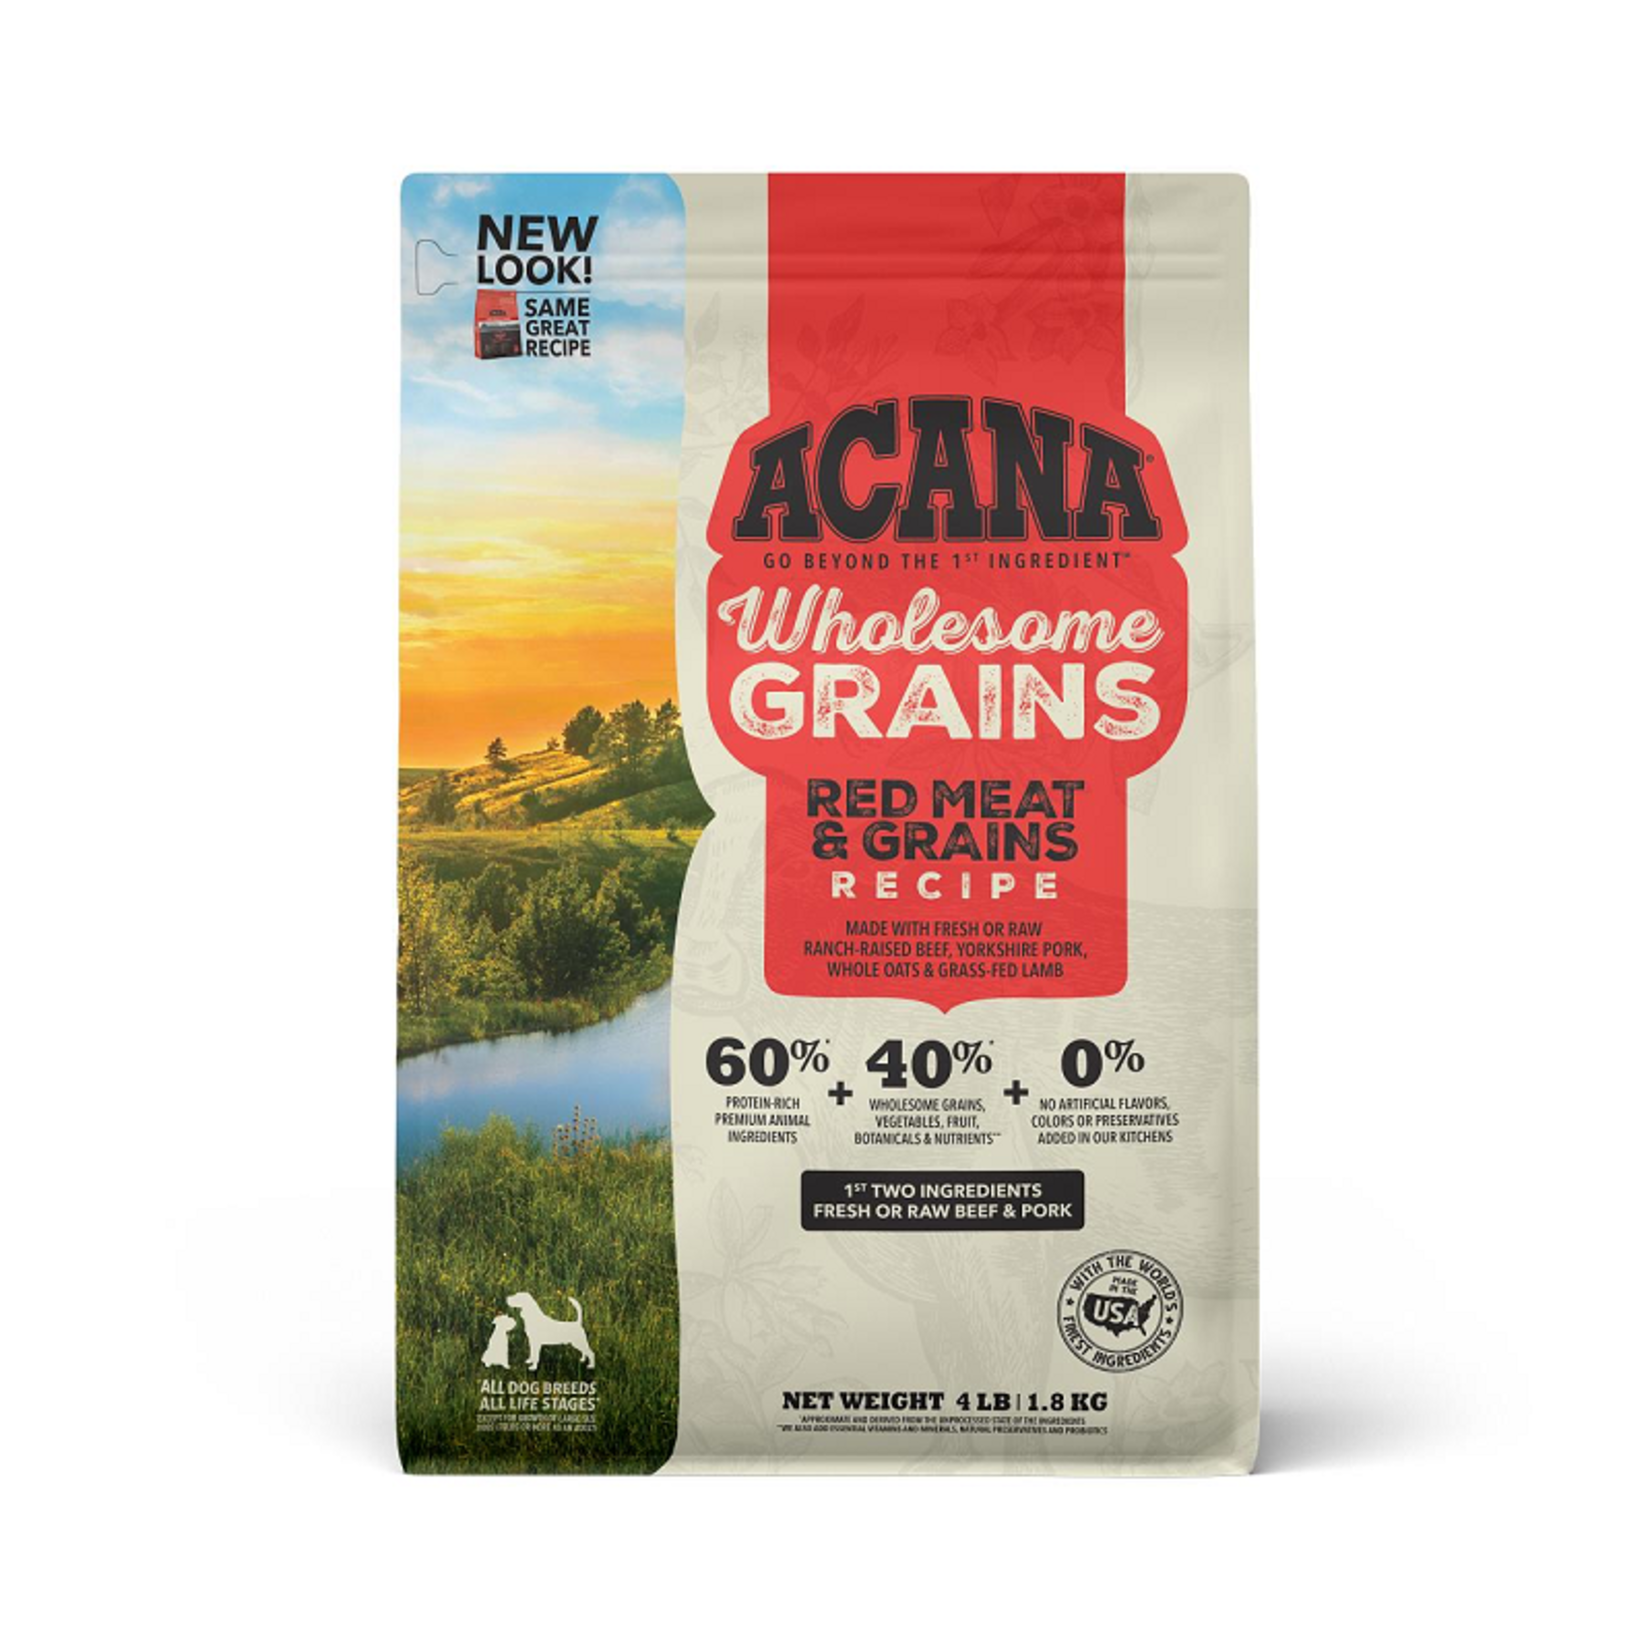 Acana Red Meat - Wholesome Grains - Acana - Dog